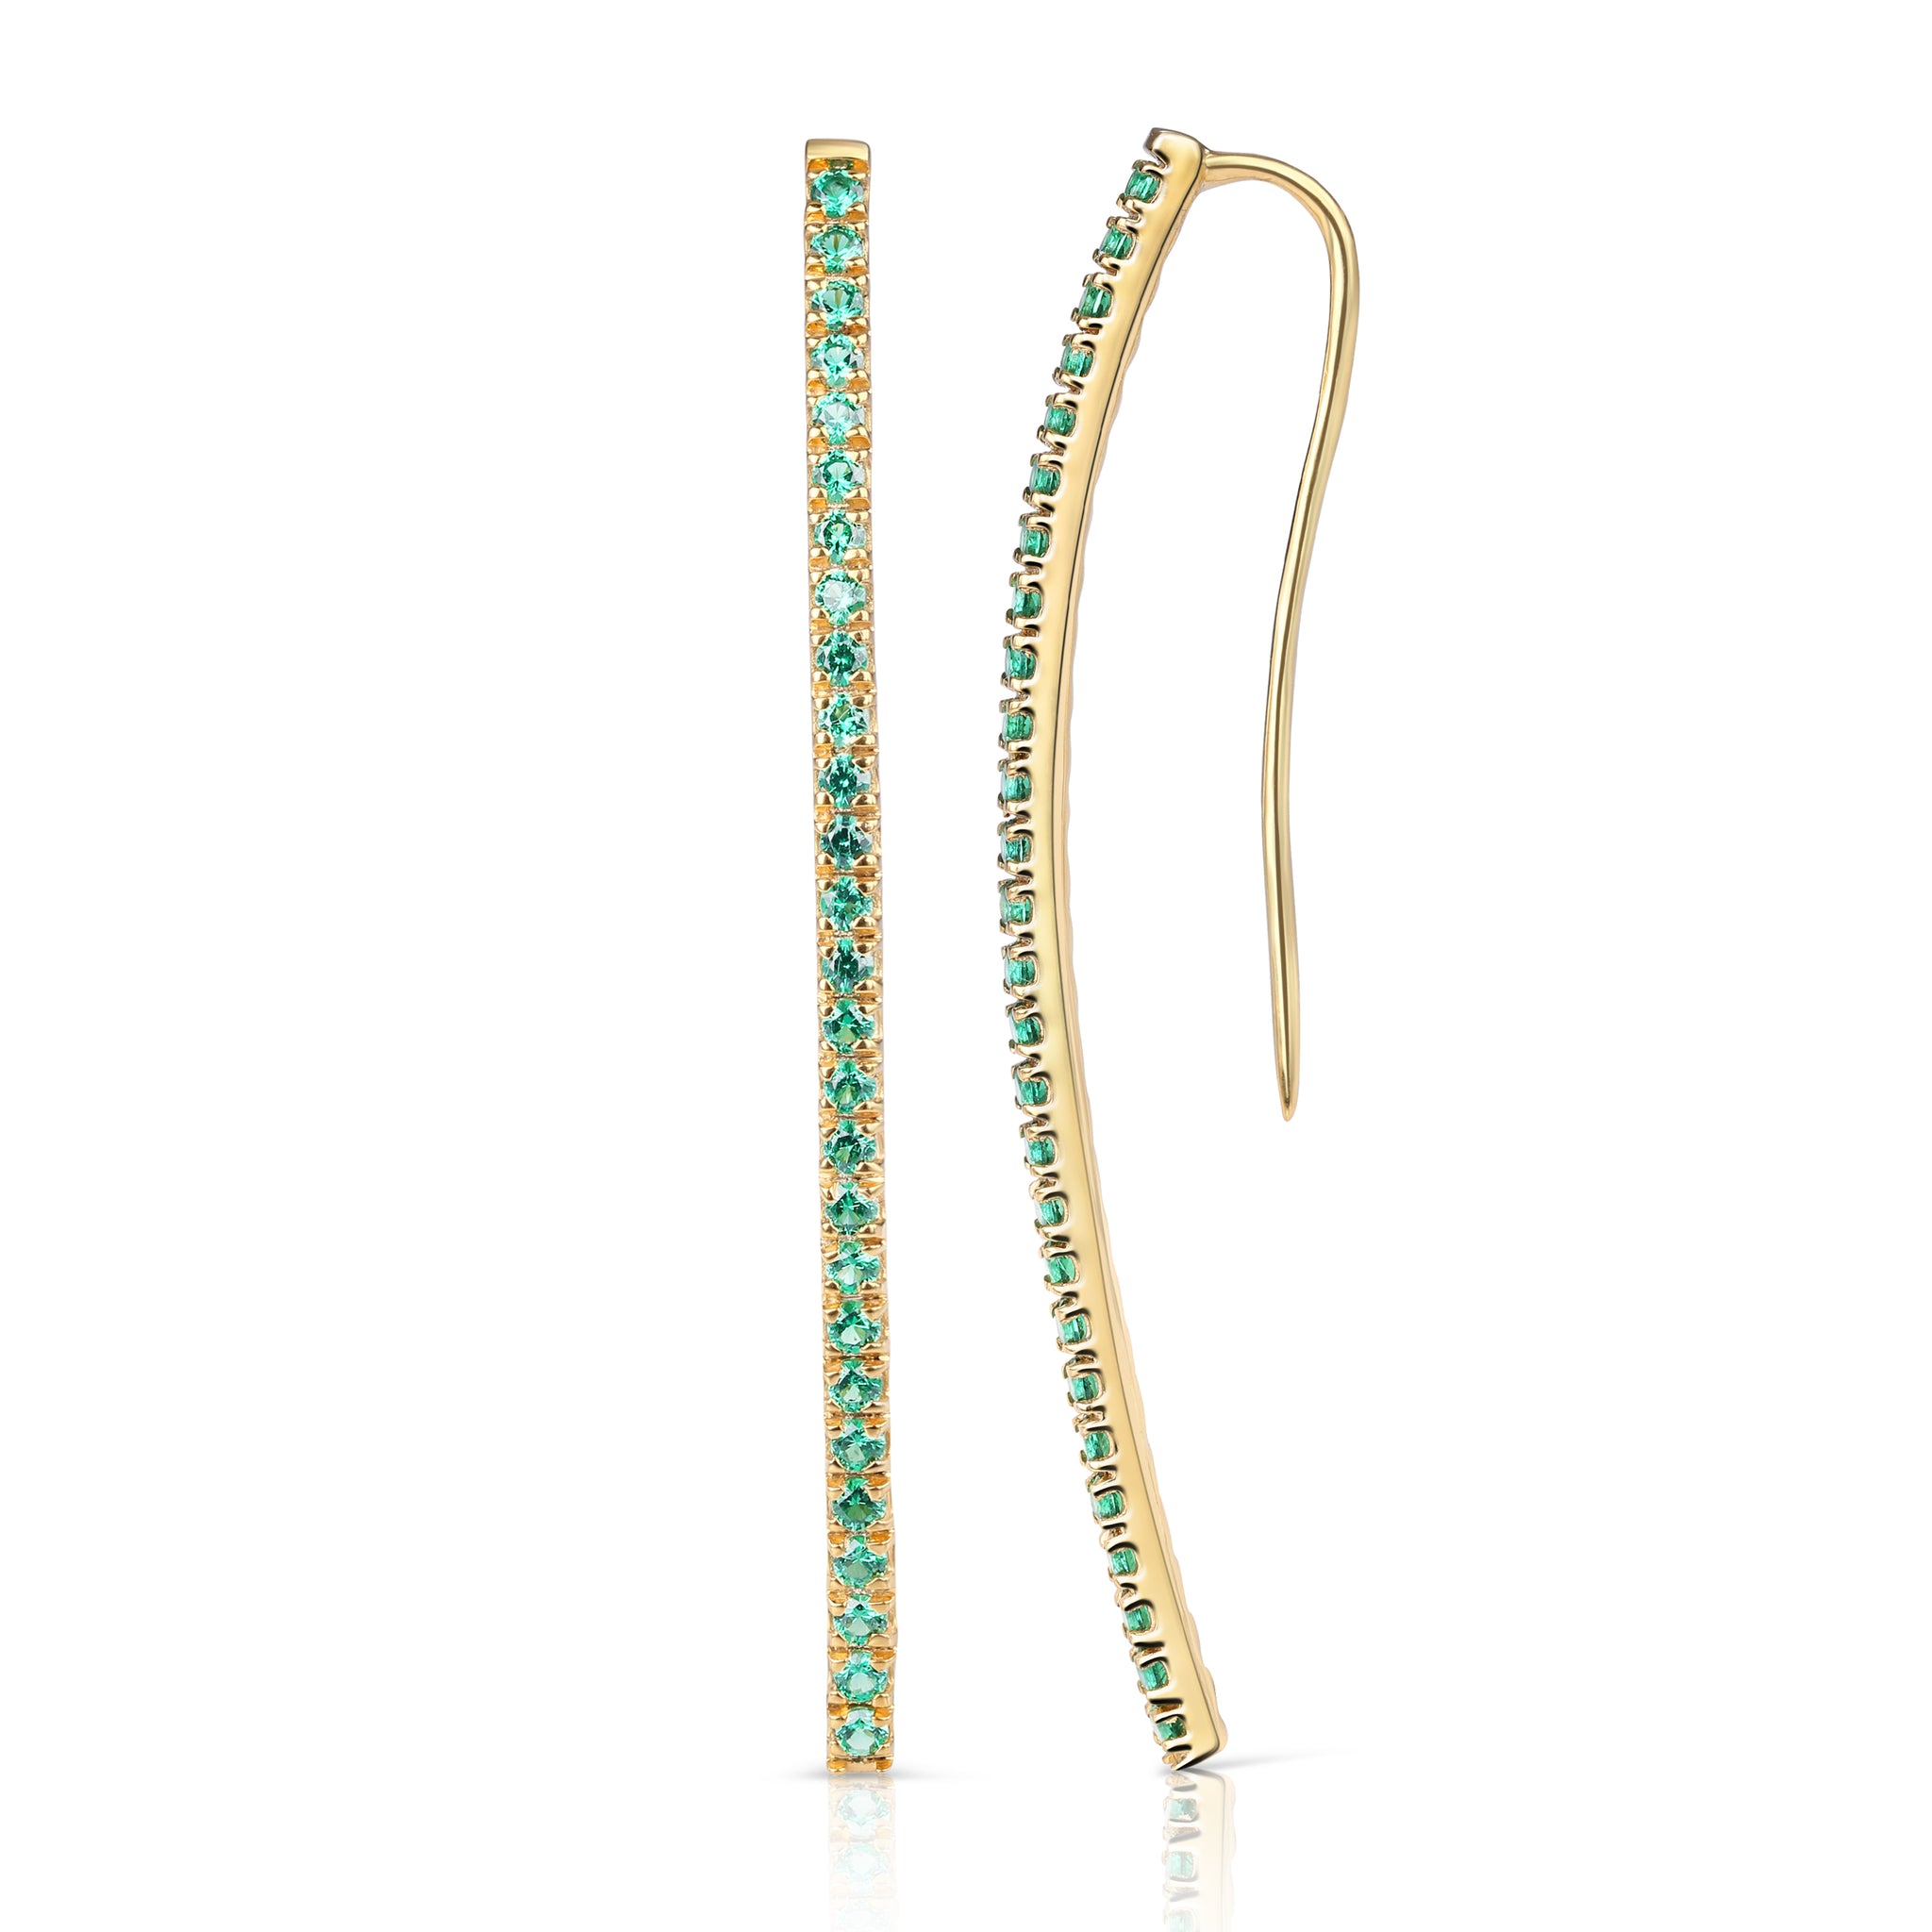 Gogetter's Work Earrings - Gold and Green